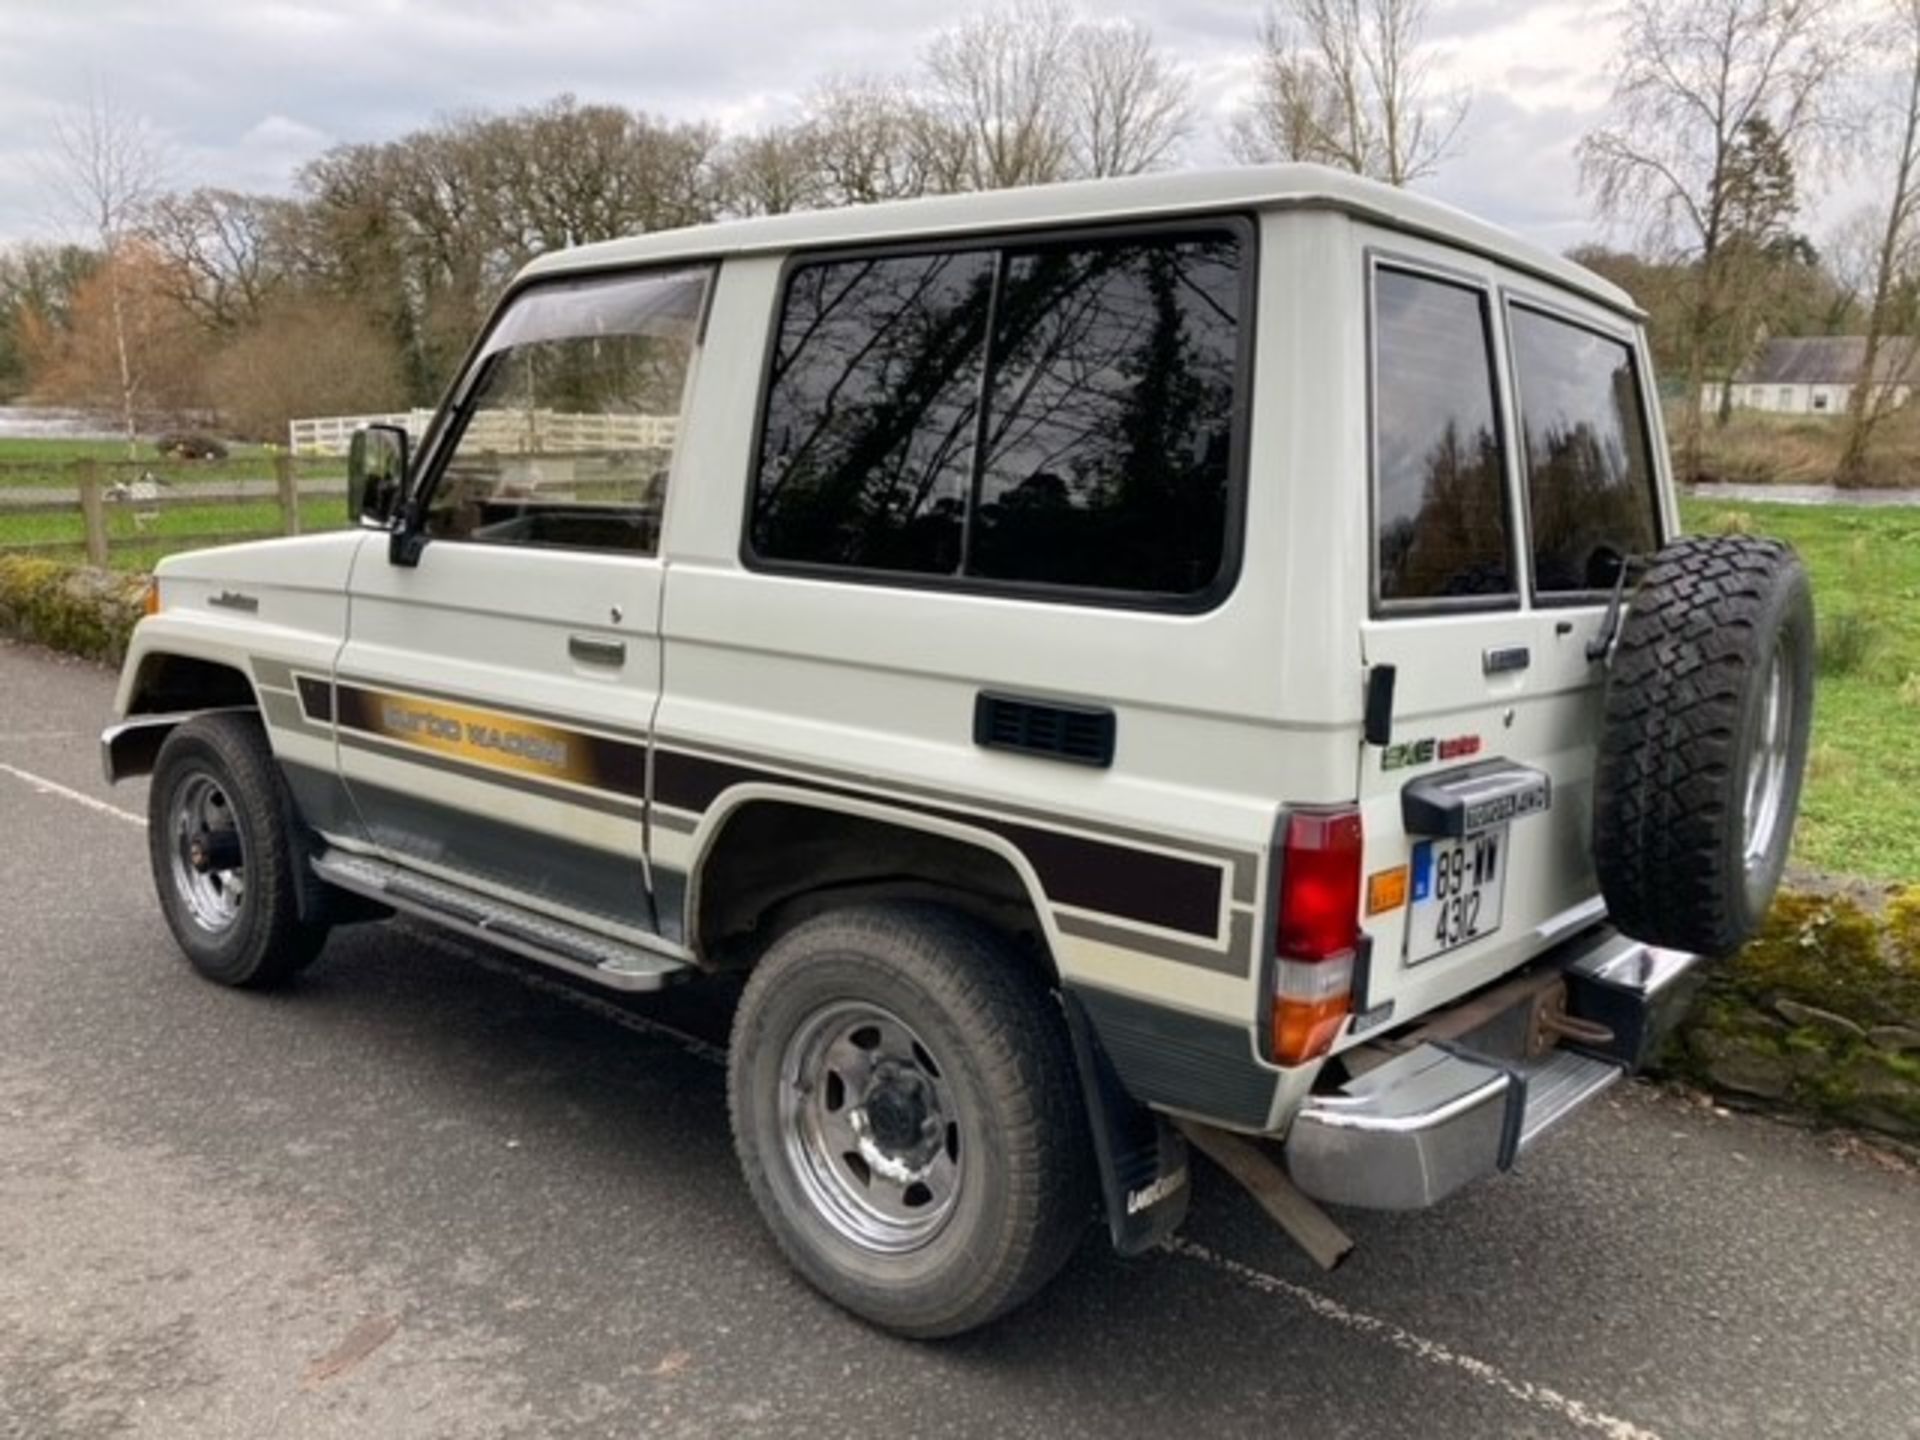 Toyota Landcruiser 1989 A nice example of this increasingly collectable 4x4 from long term - Image 2 of 30